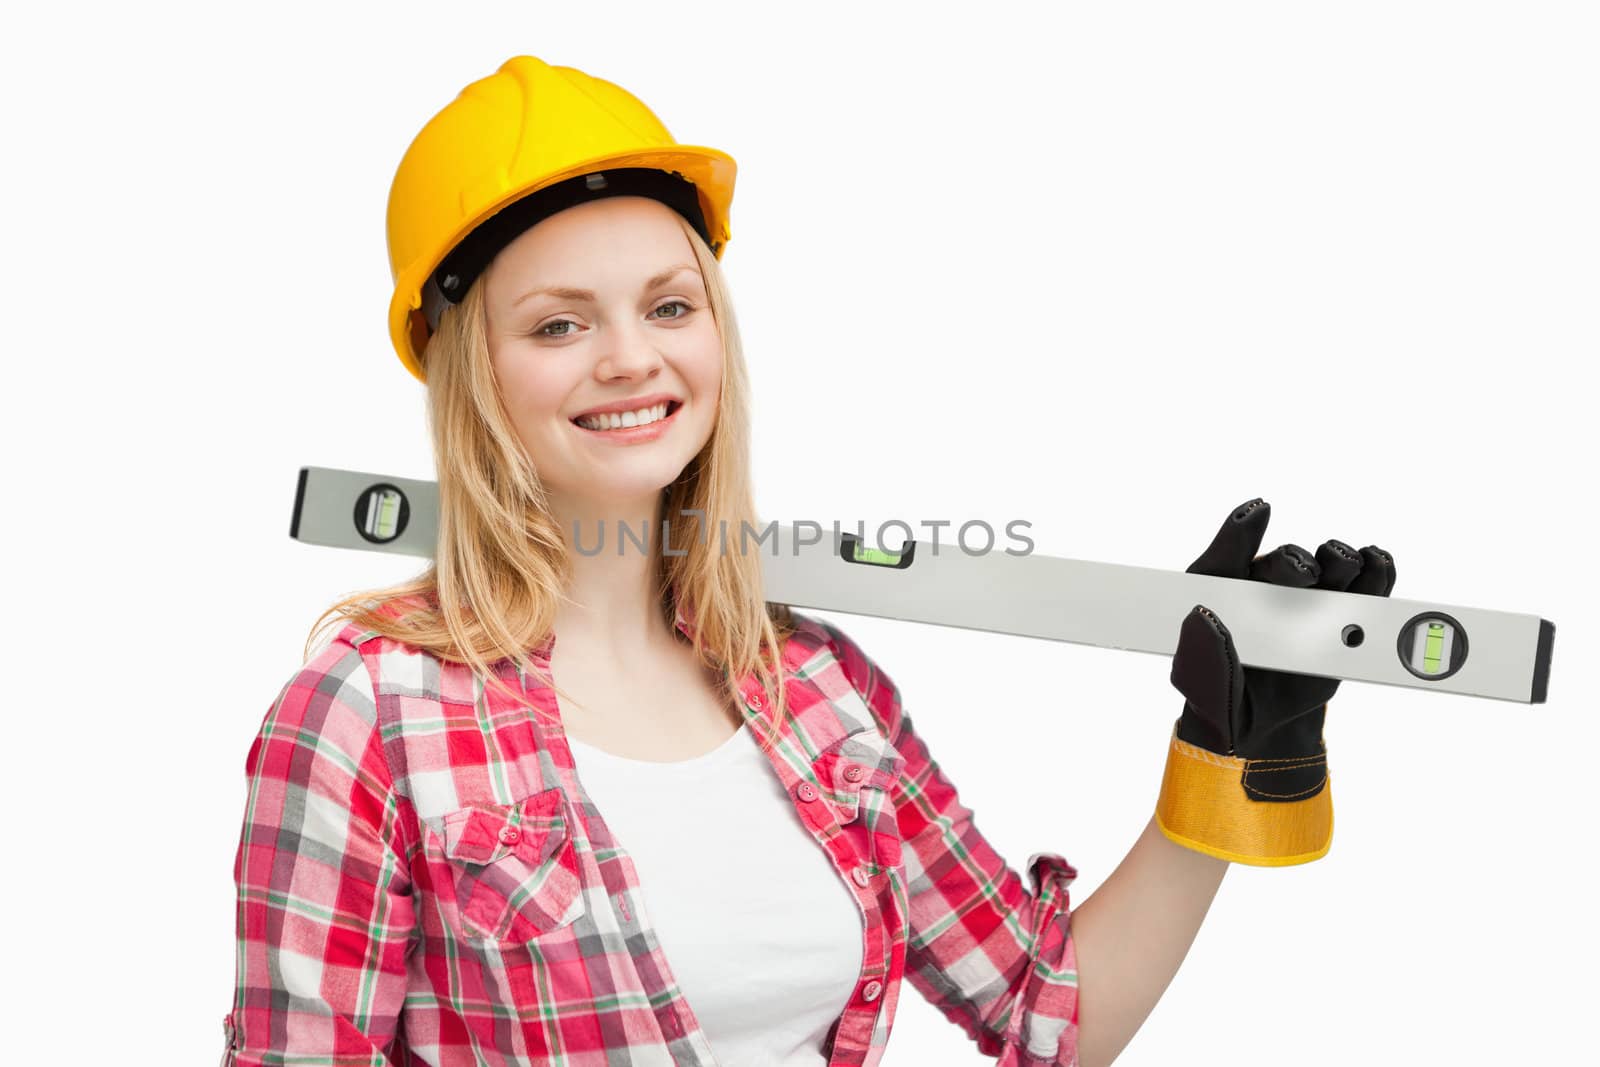 Smiling woman holding a spirit level against white background